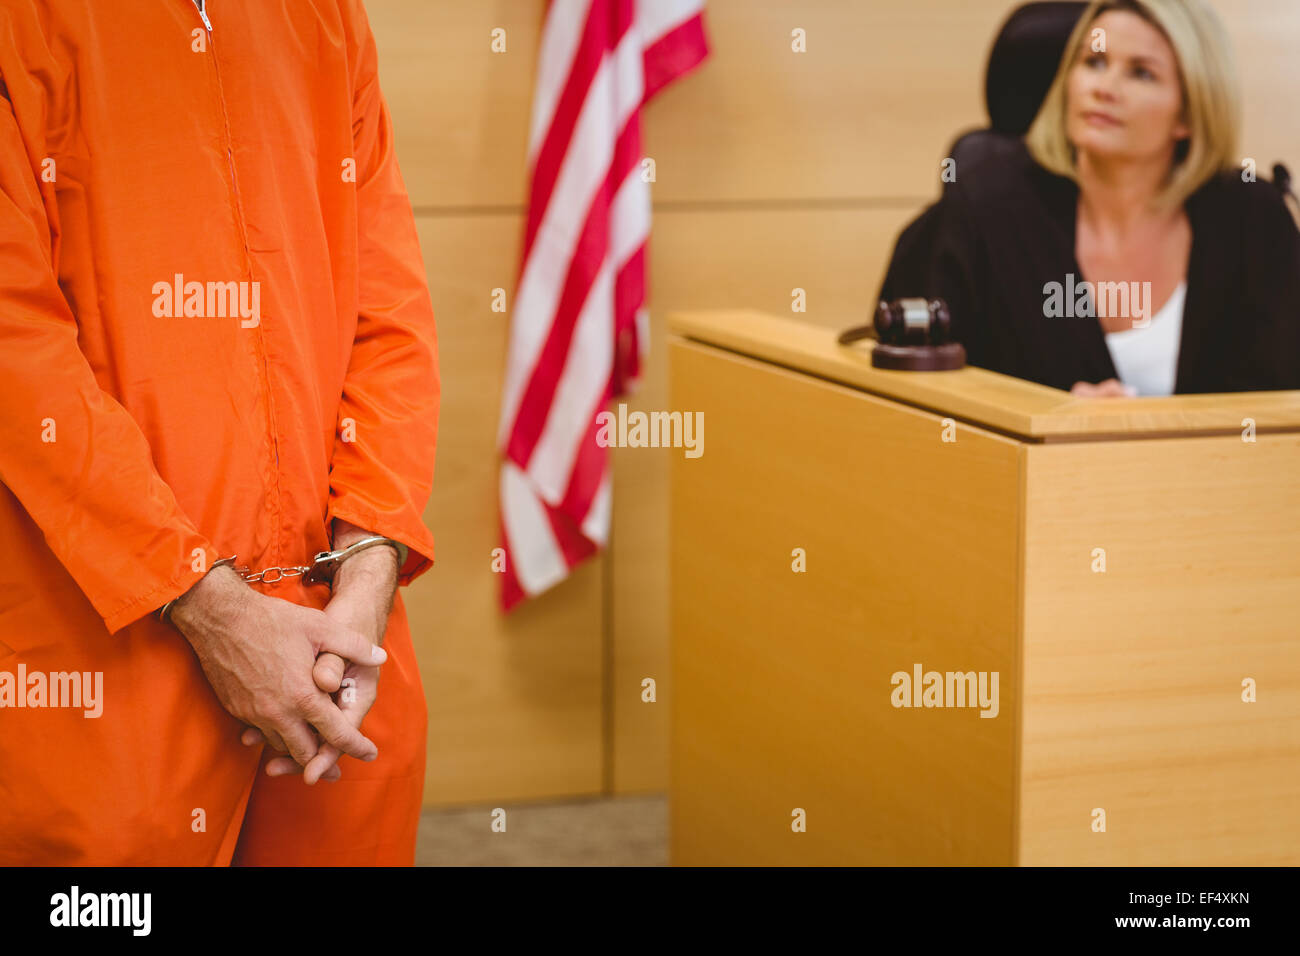 Judge looking the condemned prisoner Stock Photo